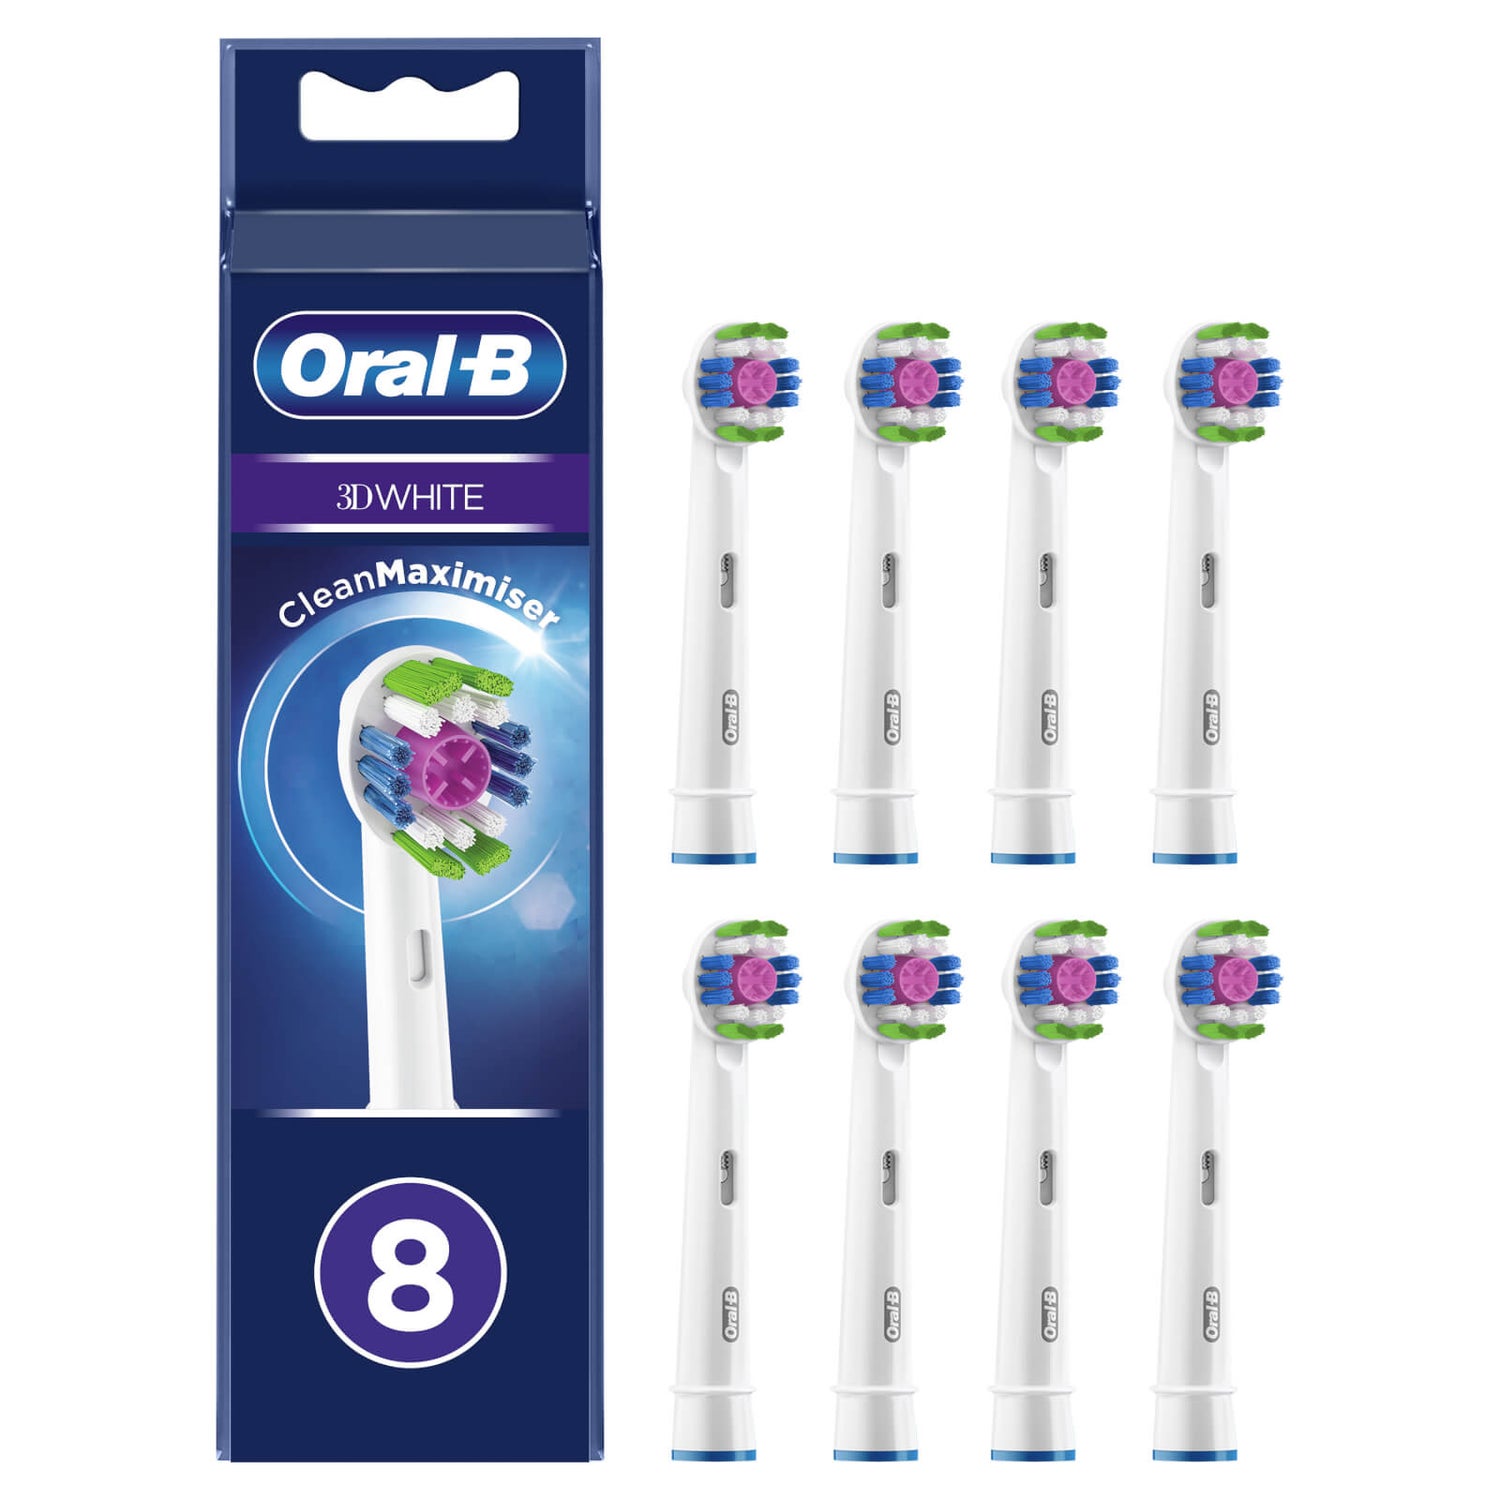 Oral B 3D White Brush Head with Clean Maximiser - 8 Counts